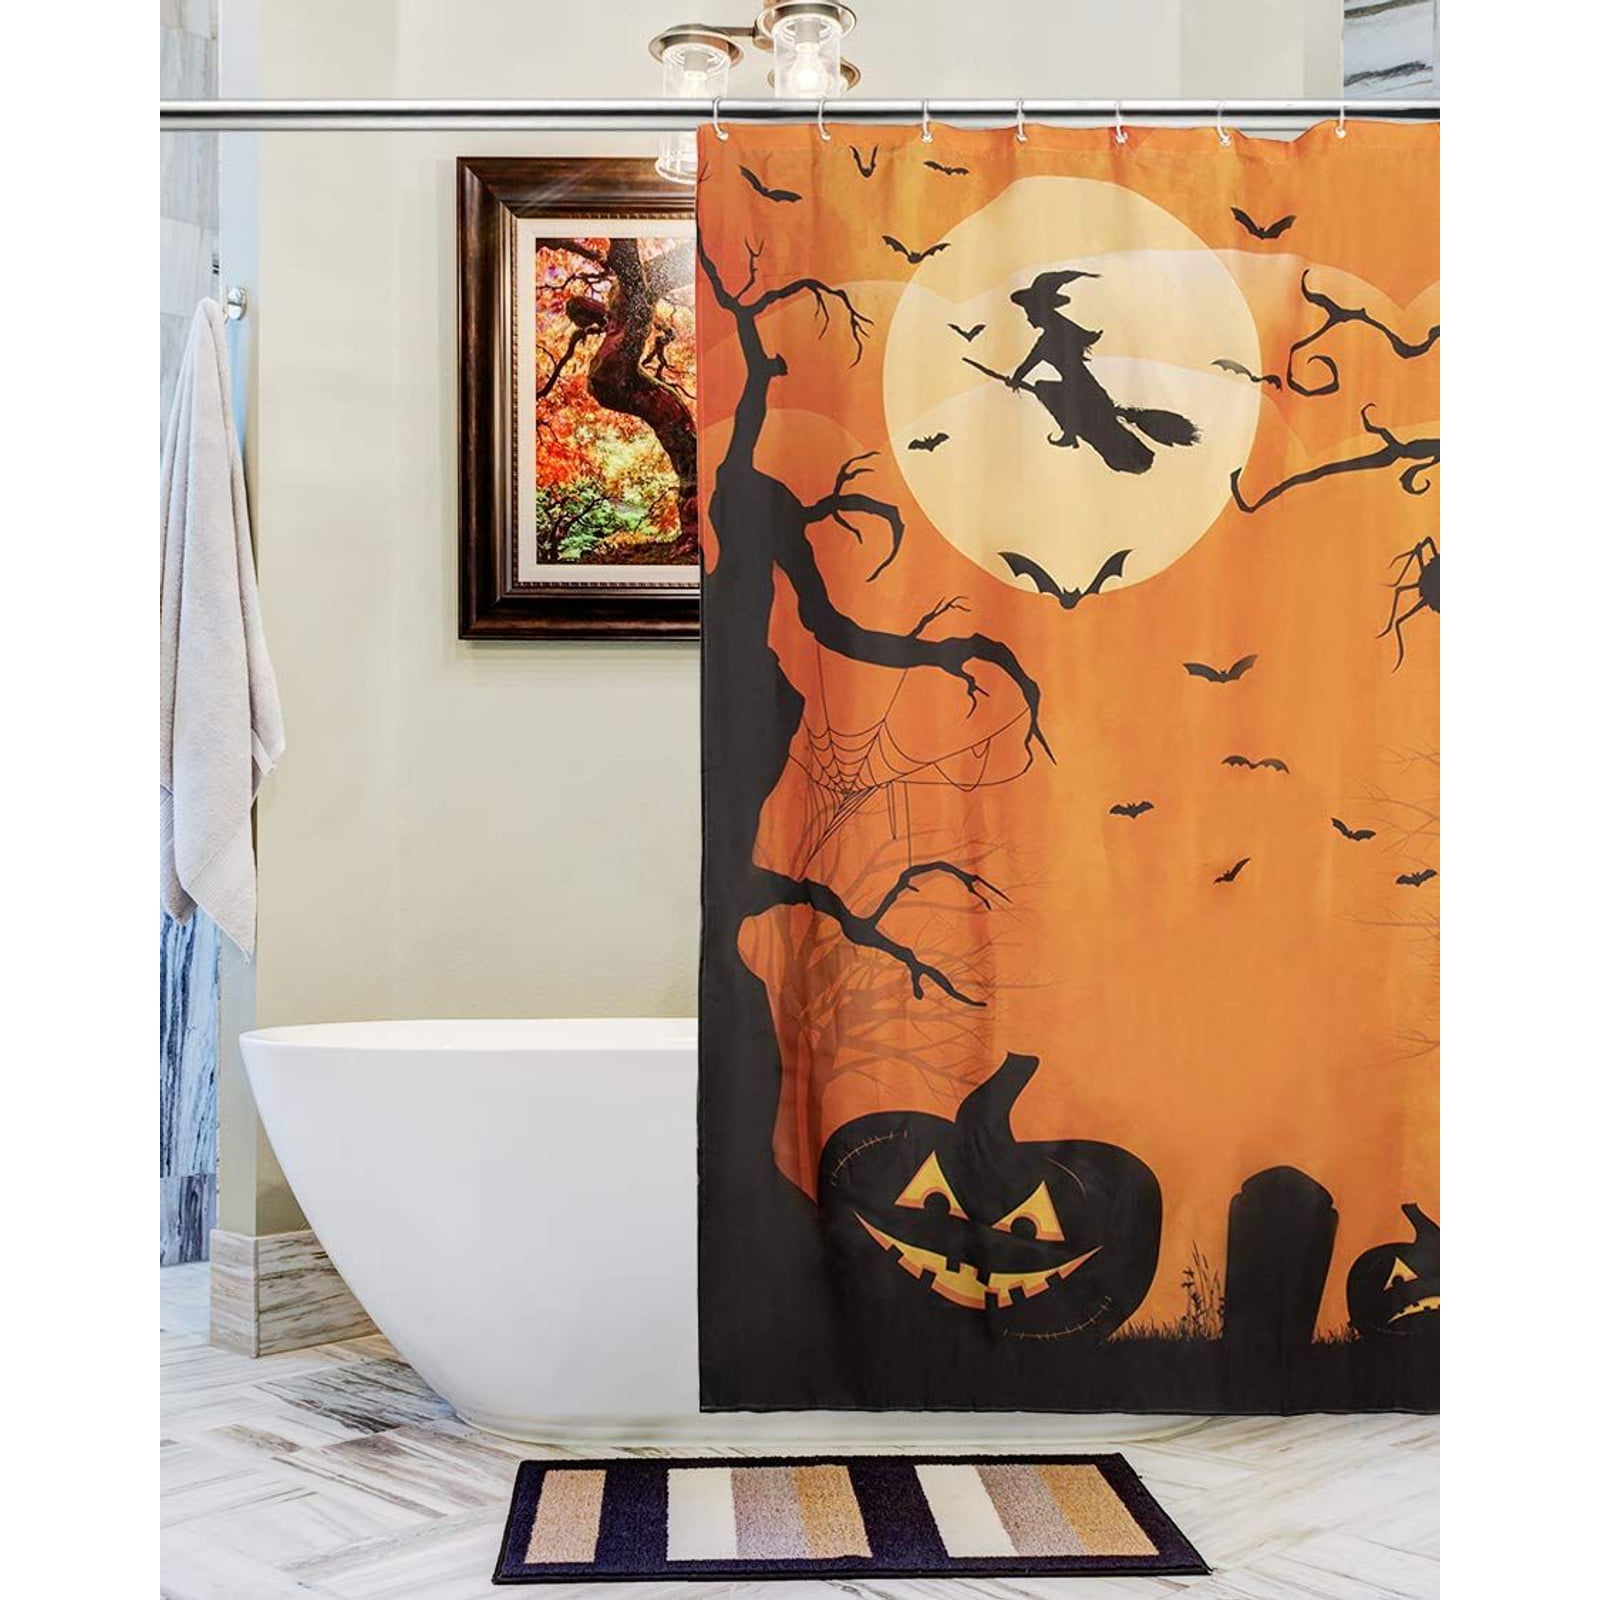 72x72 Trick or Treat Pumpkins Waterproof Bath Curtain Gnomes Purple Truck Spooky Witch Black Cat Holiday Decor Fabric Shower Curtains with Hooks Bonsai Tree Halloween Shower Curtain for Bathroom